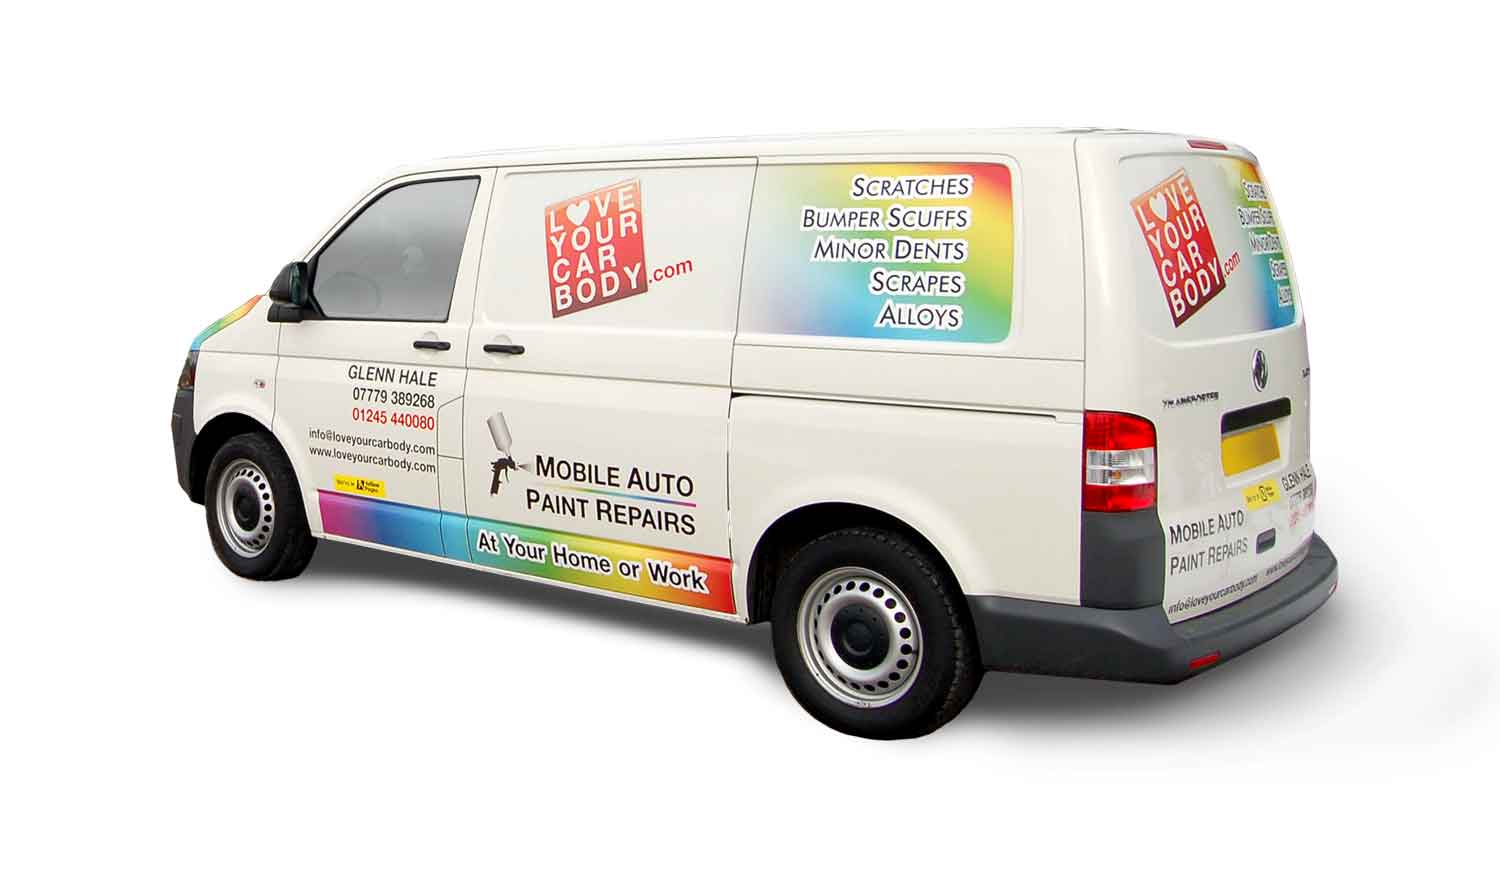 LoveYourCarBody.com vehicle graphics